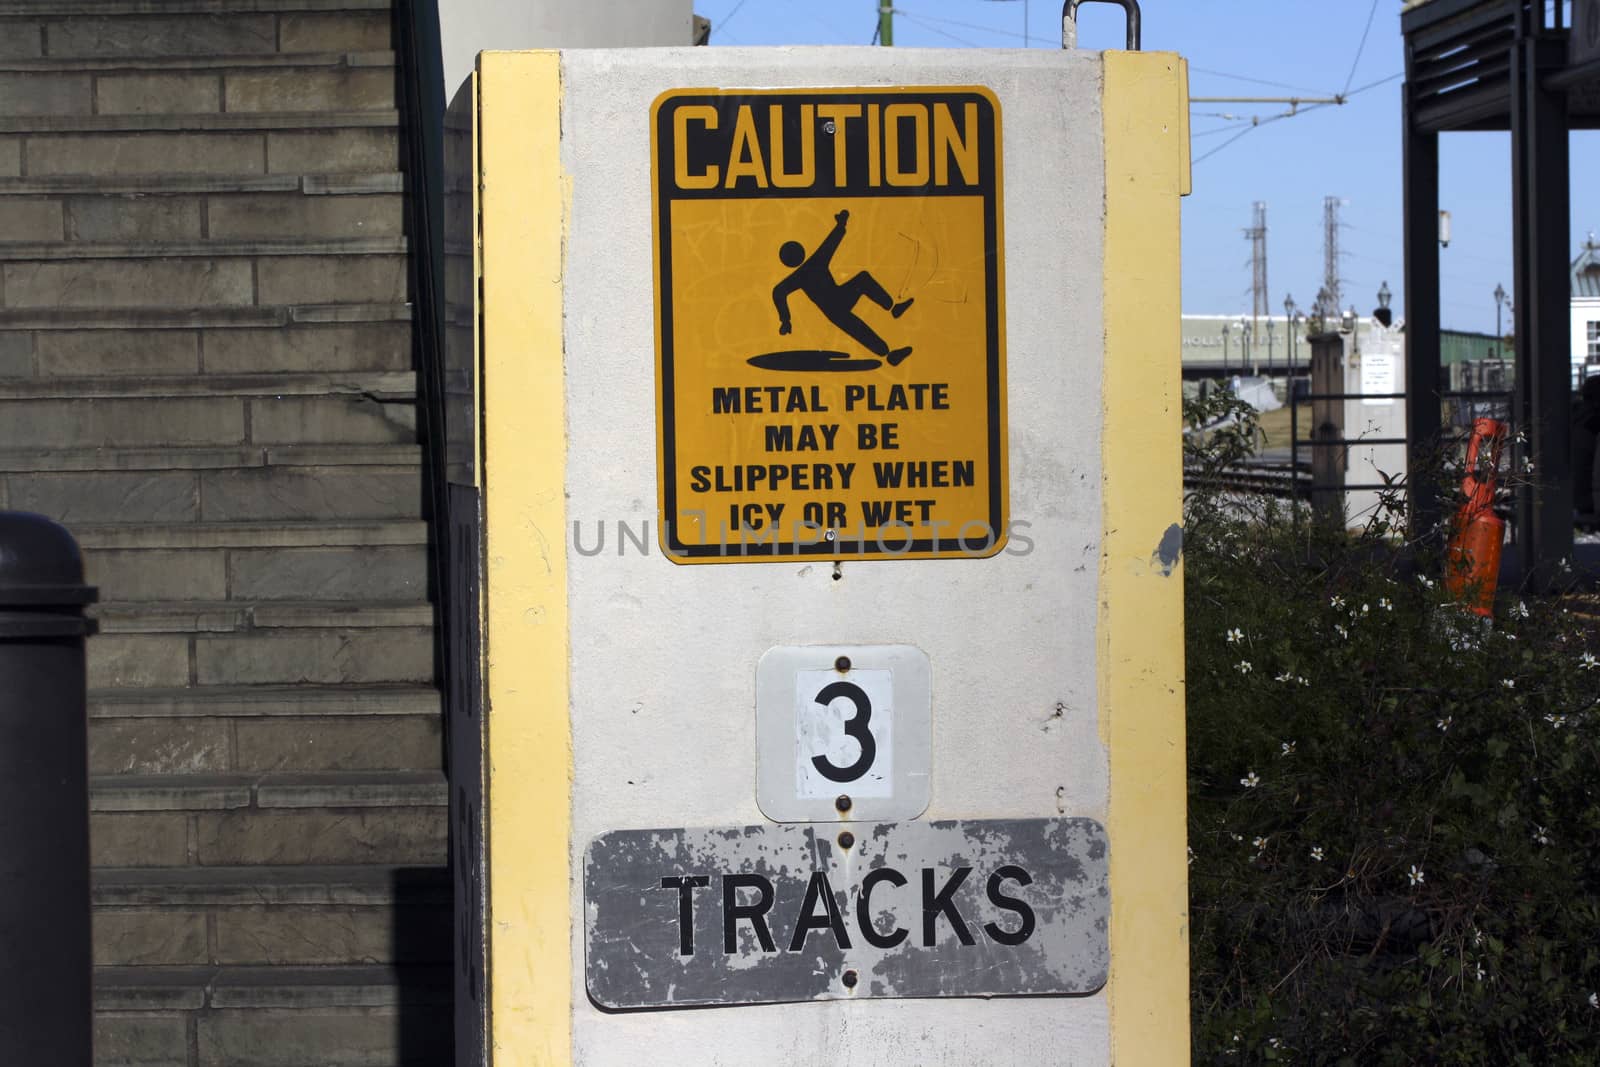 Caution sign and tracks sign